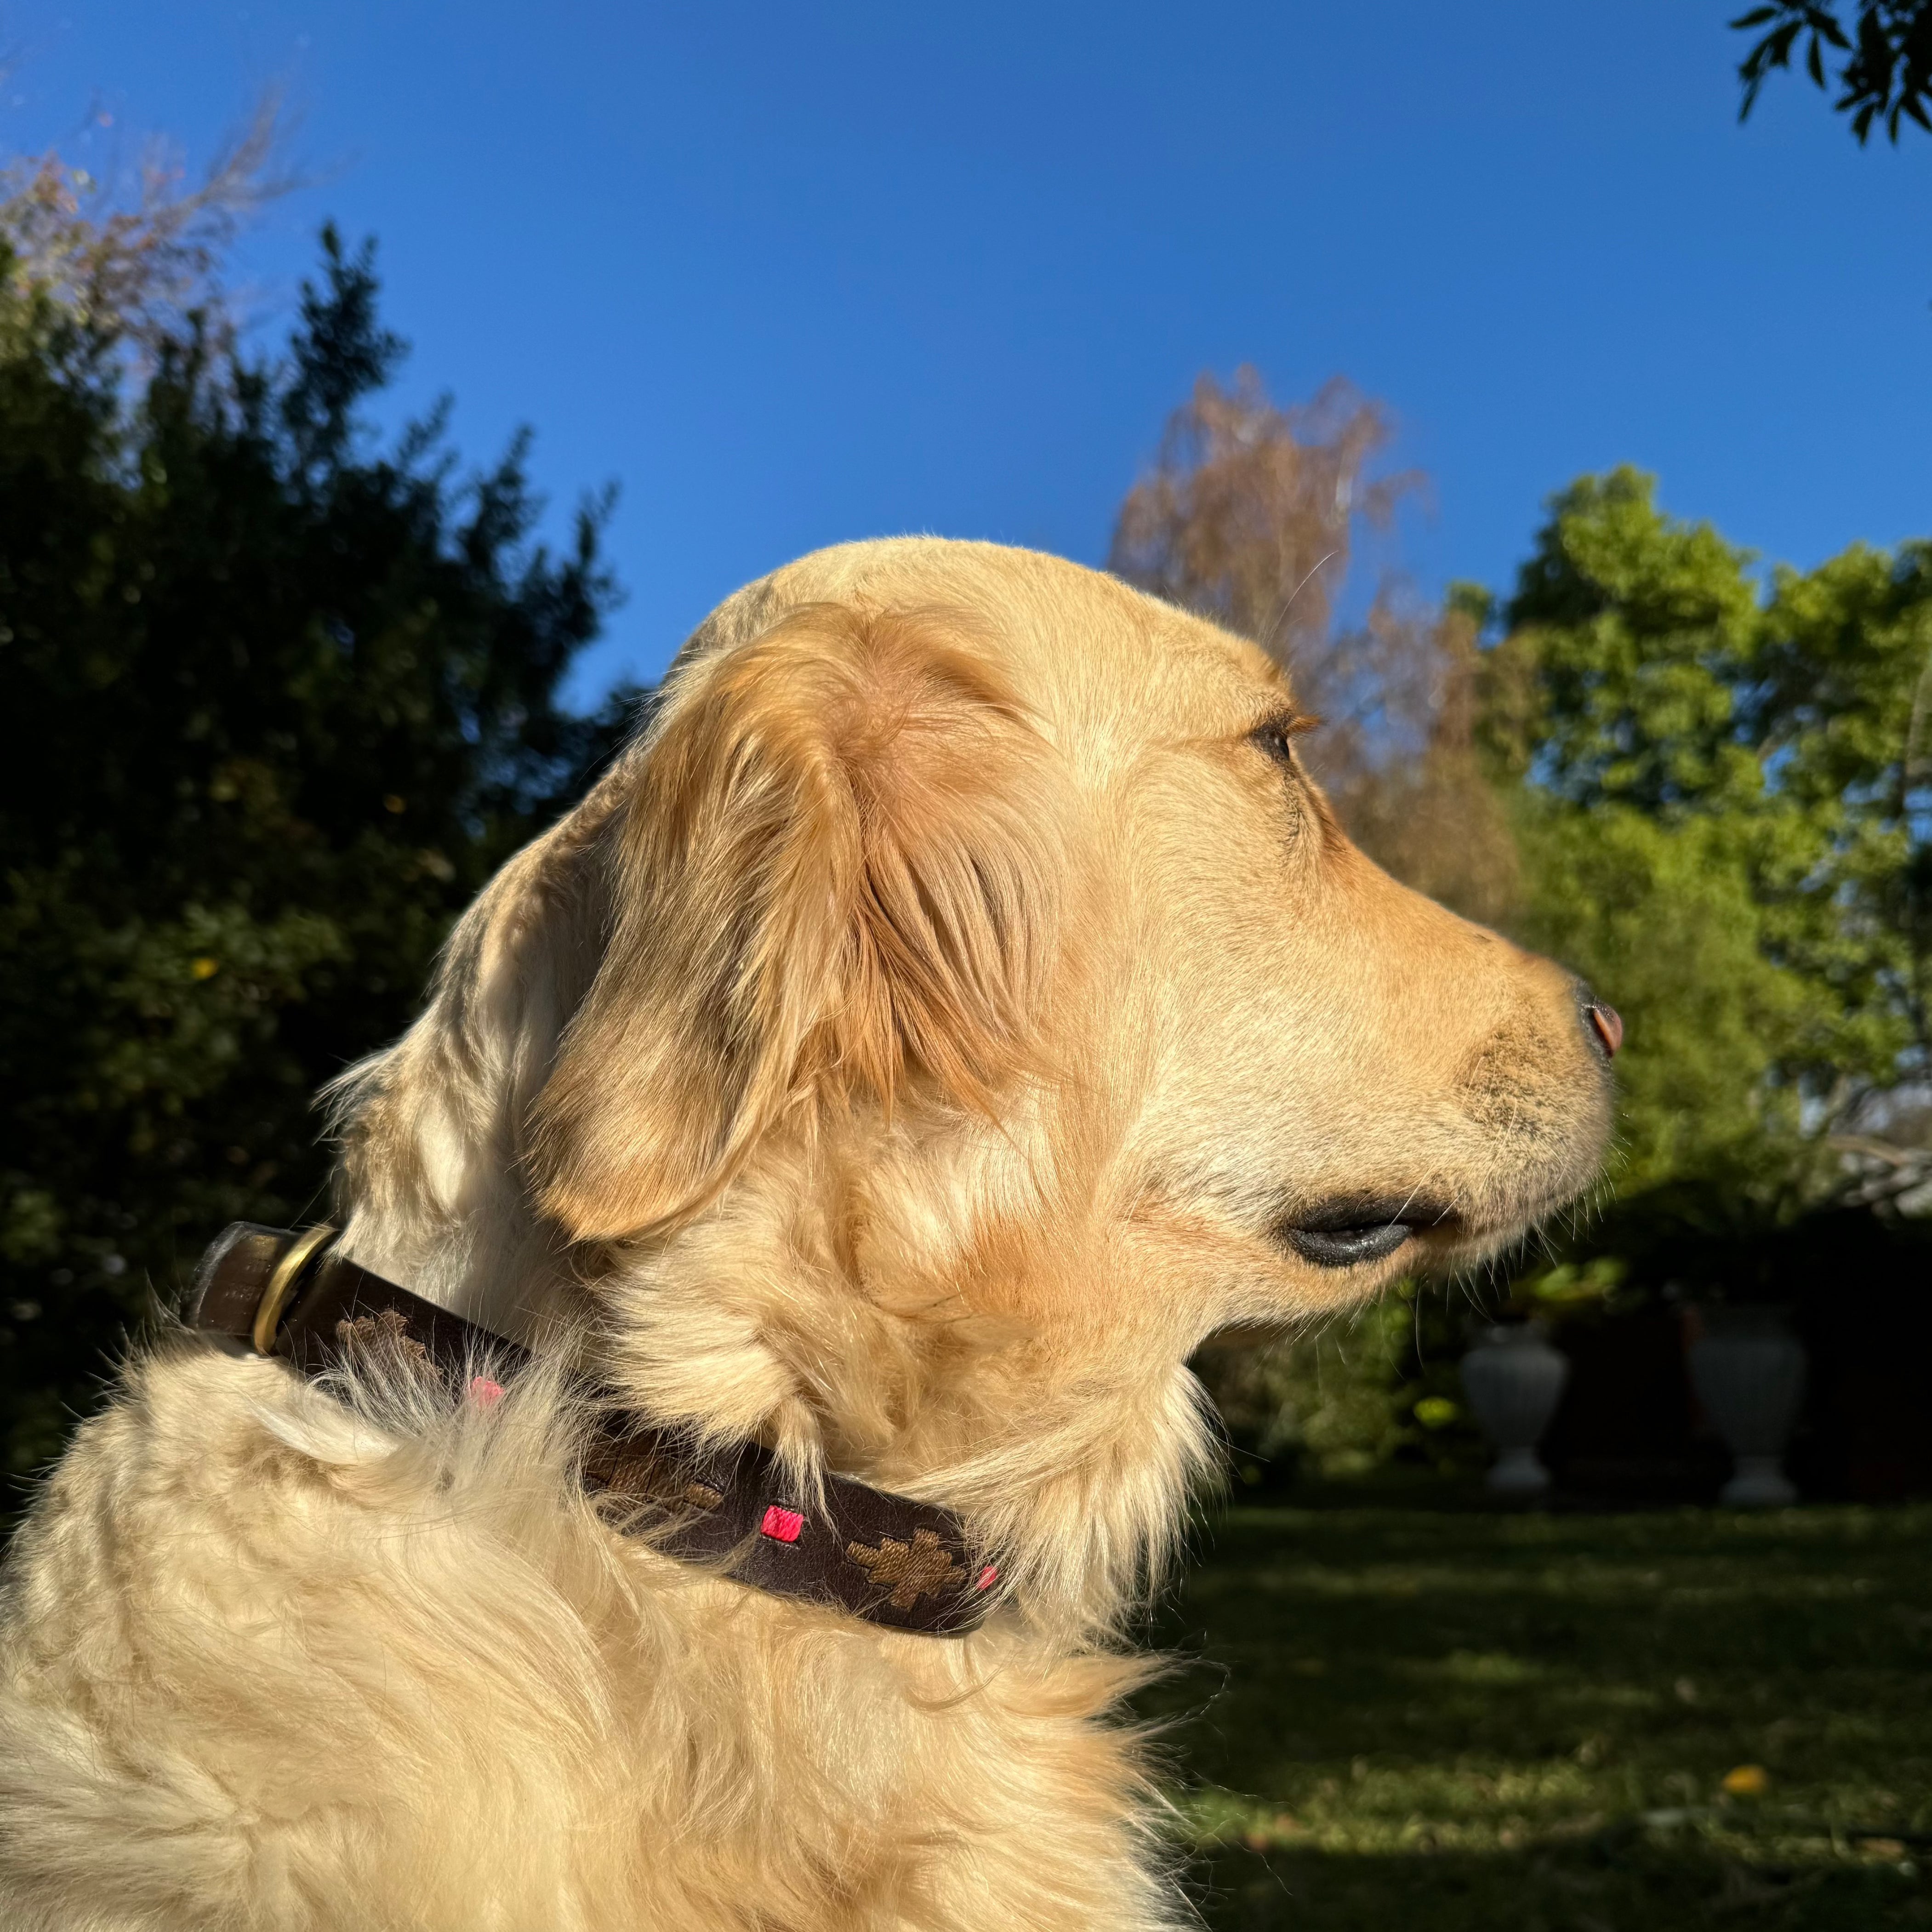 A golden retriever with a brown Polo Collar - Mage by Georgie Paws sits on green grass, looking to the right. The dog's cream-colored fur is illuminated by sunlight. The background features trees, shrubs, and a clear blue sky, suggesting a peaceful outdoor setting. The Polo Collar - Mage gleams with brass hardware, adding a touch of elegance.